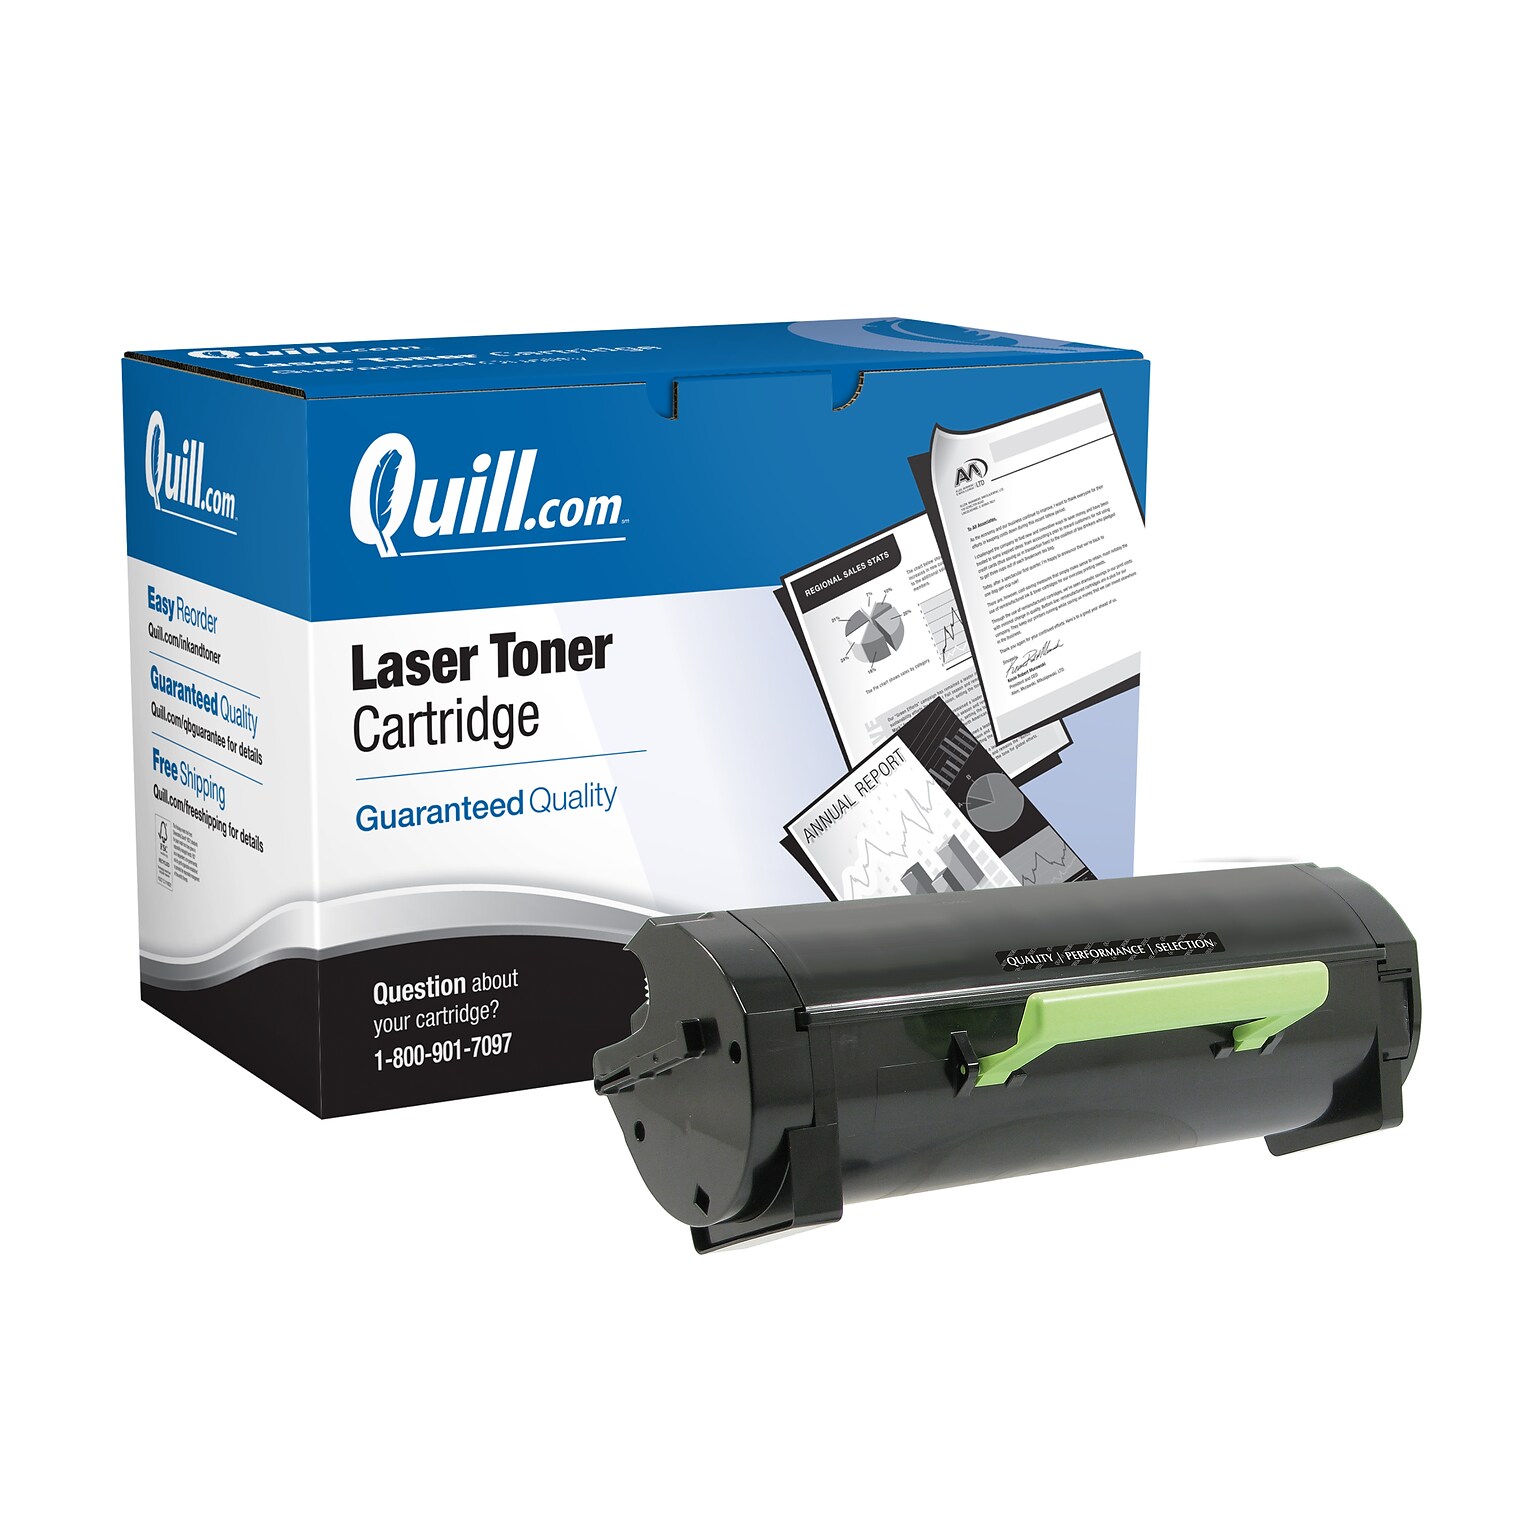 Quill Brand® Remanufactured Black High Yield Toner Cartridge Replacement for Dell 2360/3460/3465 (1V7V7) (Lifetime Warranty)